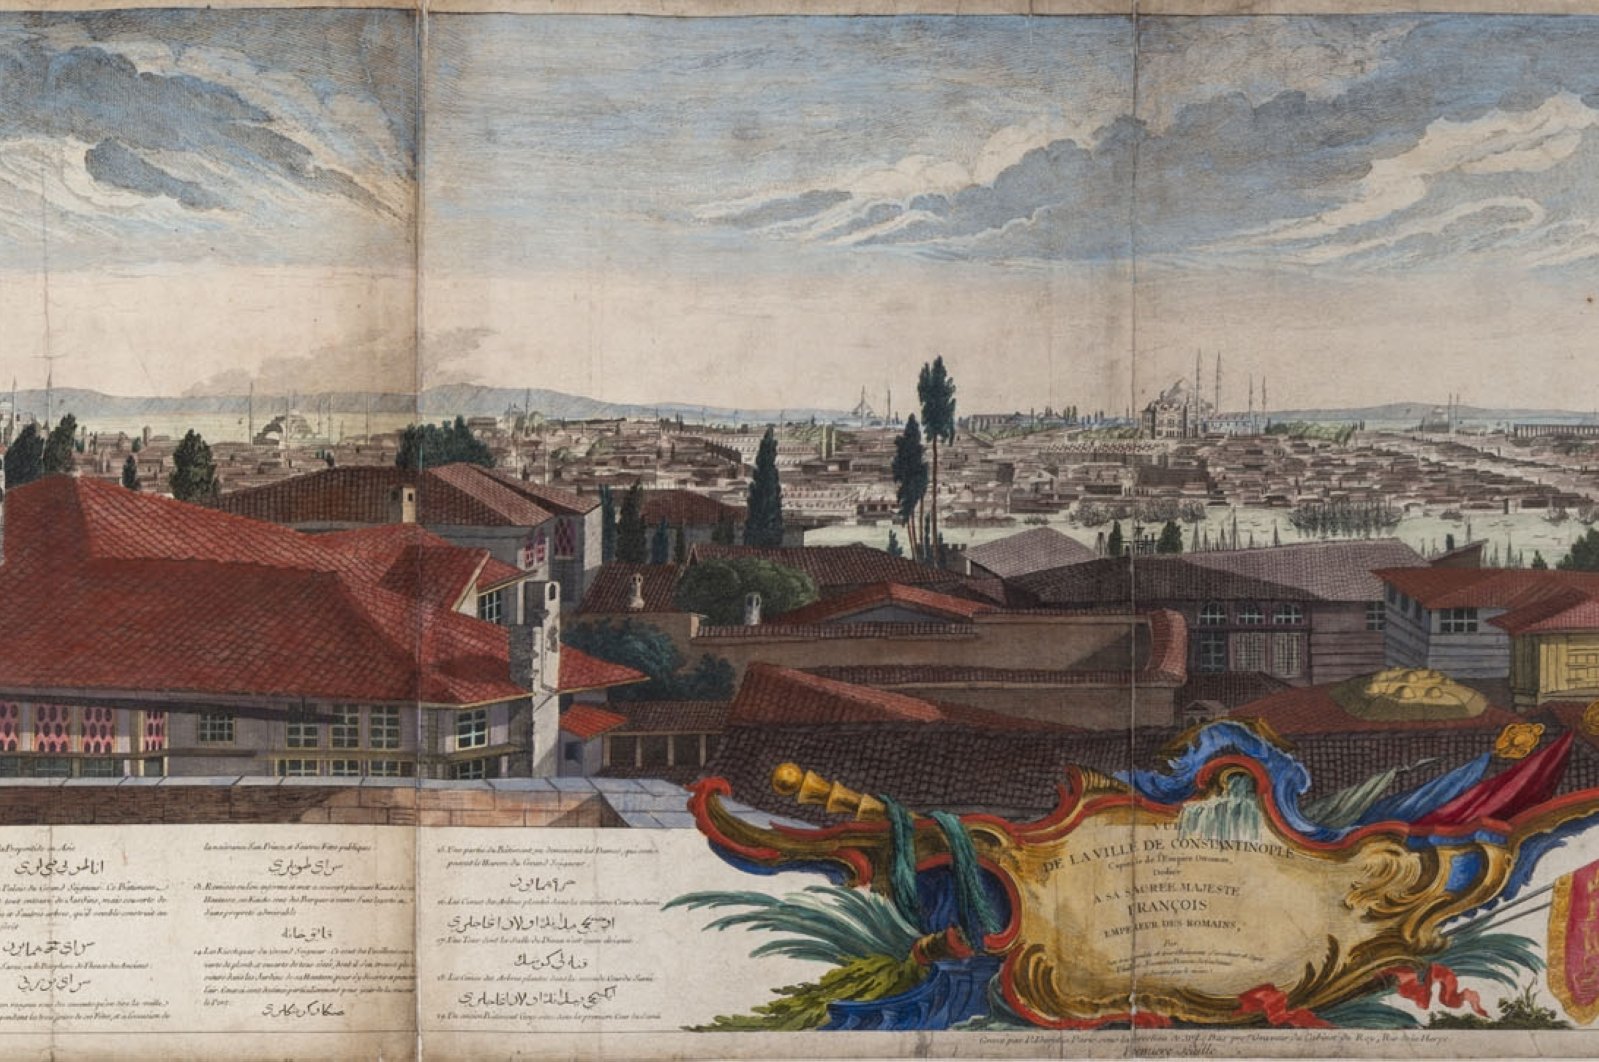 &quot;The View of the City of Constantinople, the Capital of the Ottoman Empire&quot; by Philippe von Gudenus at “On the Spot” exhibition. (Photo courtesy of Pera Museum)